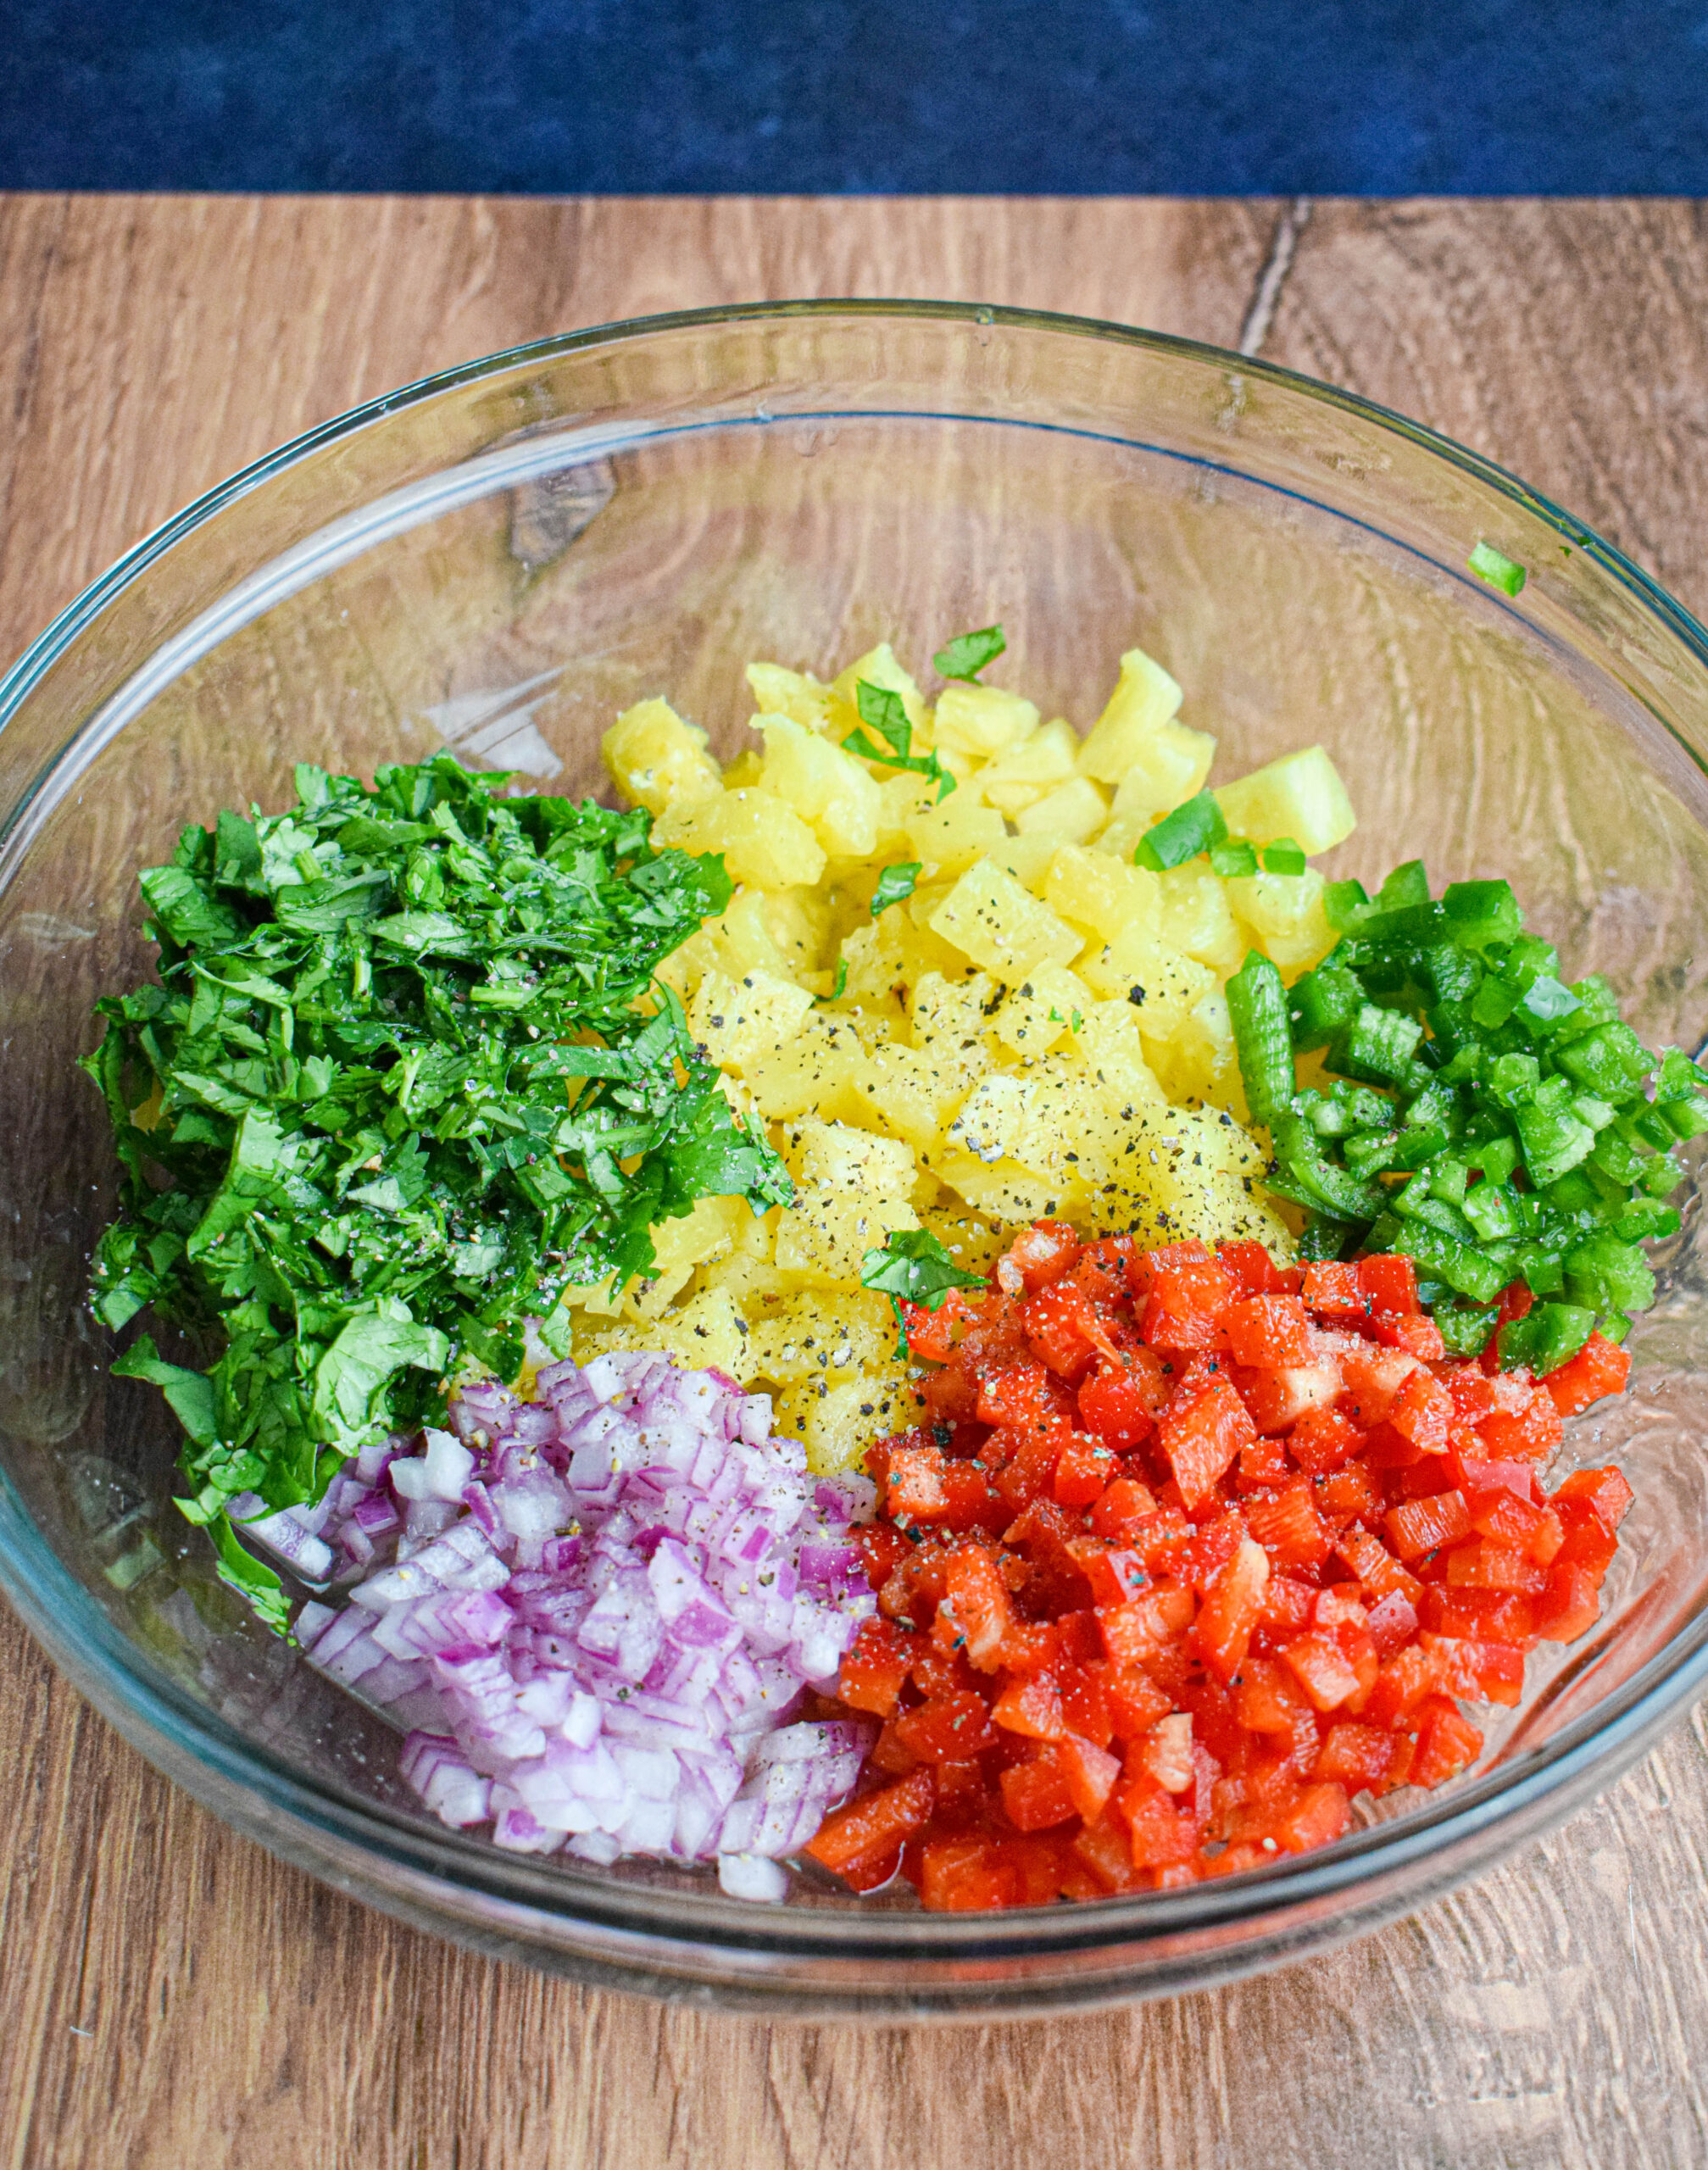 ingredients for pineapple pico de gallo chopped and arranged in a glass bowl. pineapple, red bell pepper, red onion, cilantro, lime. salt and pepper and jalapeno 